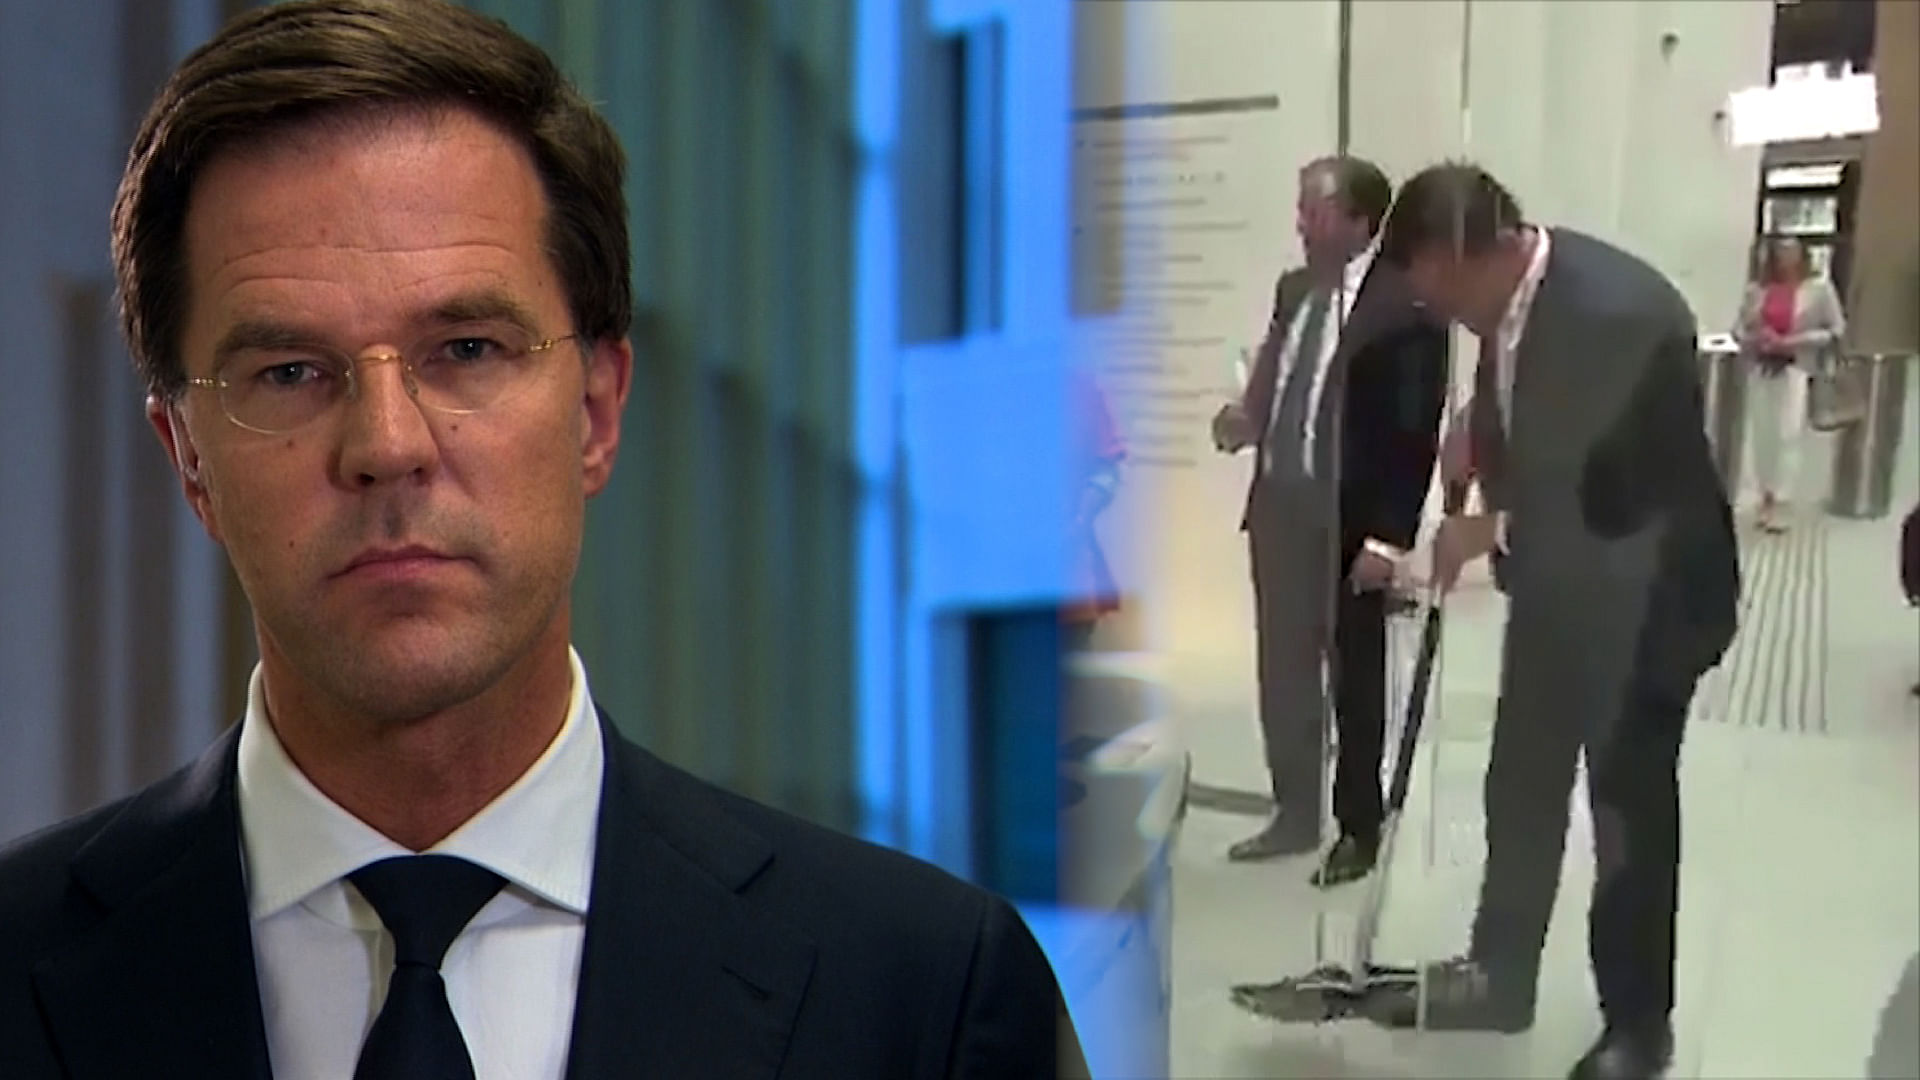 Prime Minister of The Netherlands Mark Rutte spilt coffee in a lobby of Dutch Parliament building.